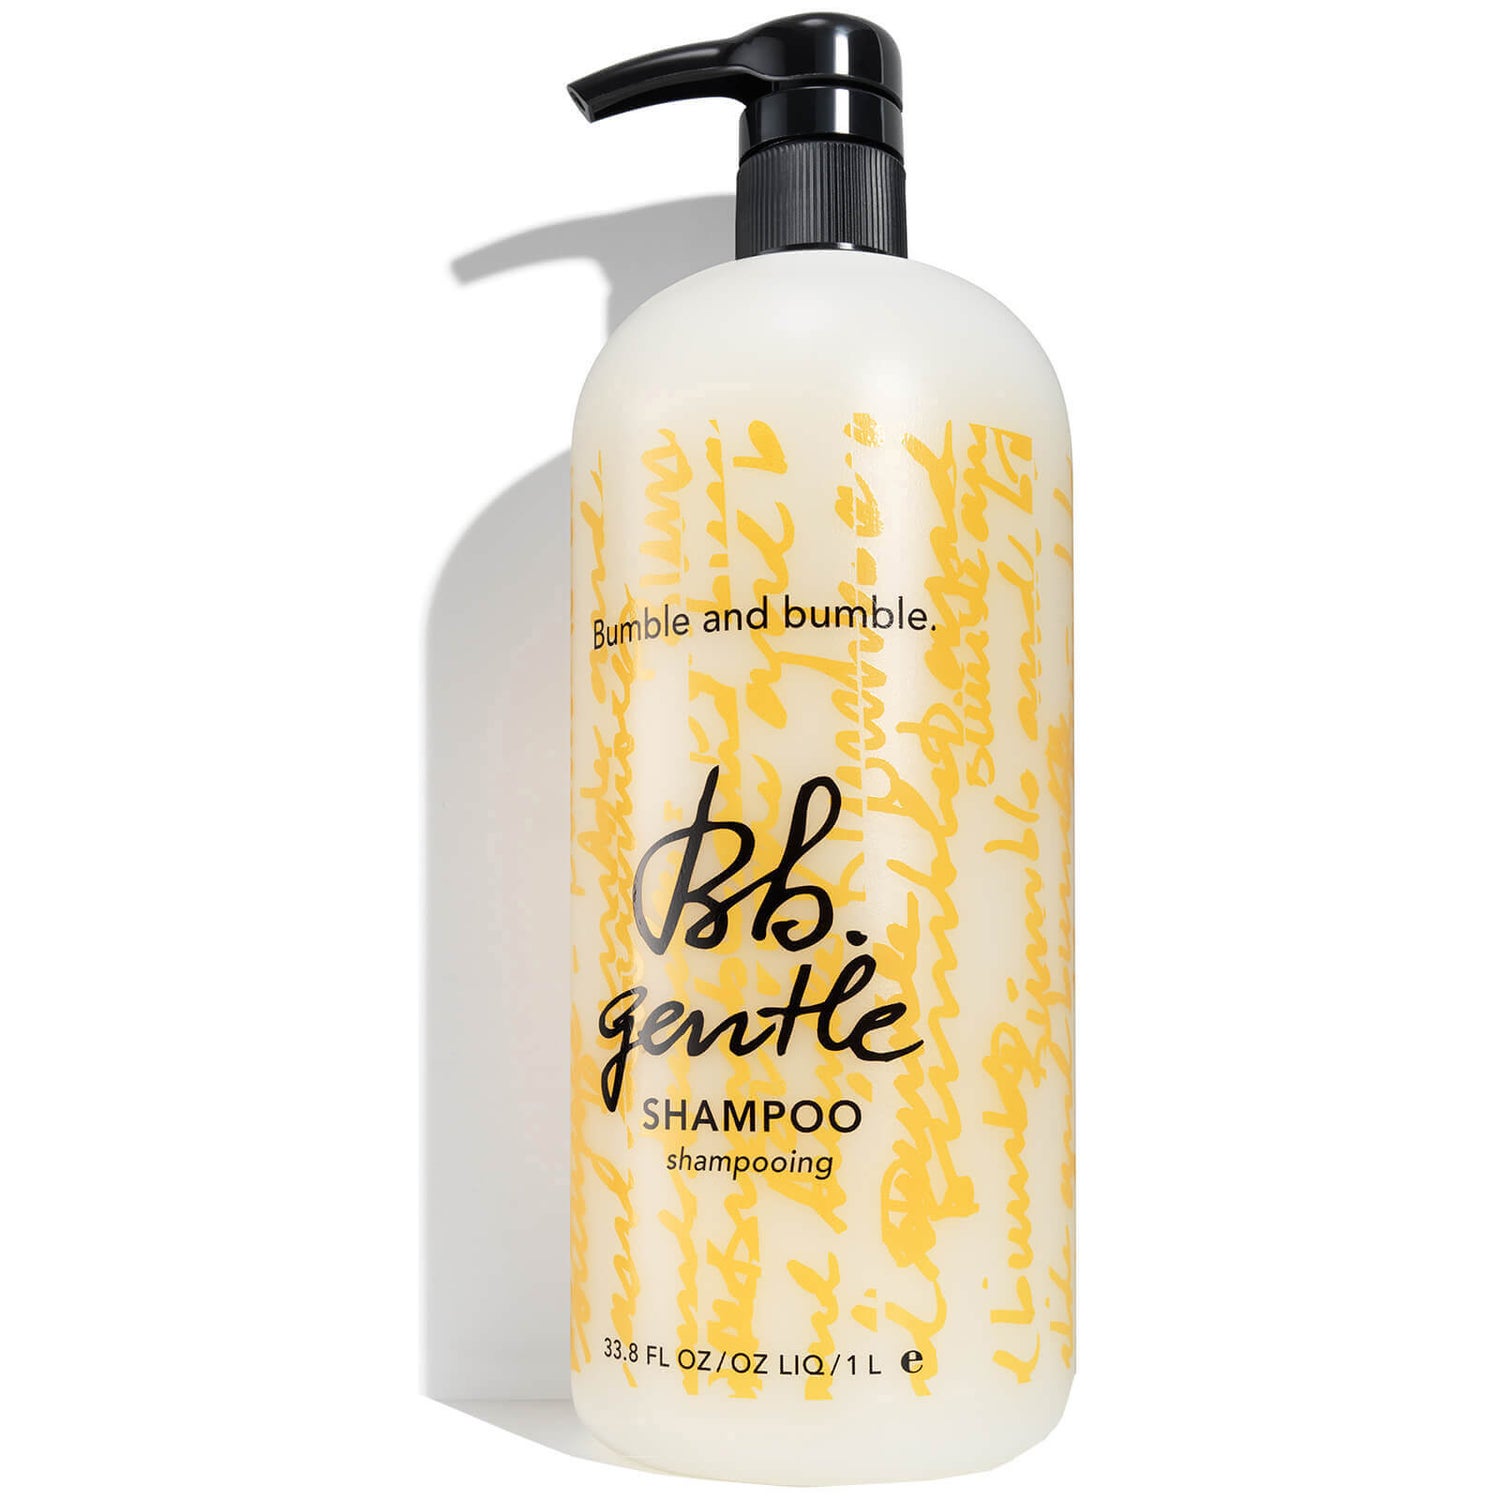 SHAMPOOING Bumble and bumble Gentle Shampoo 1000ml